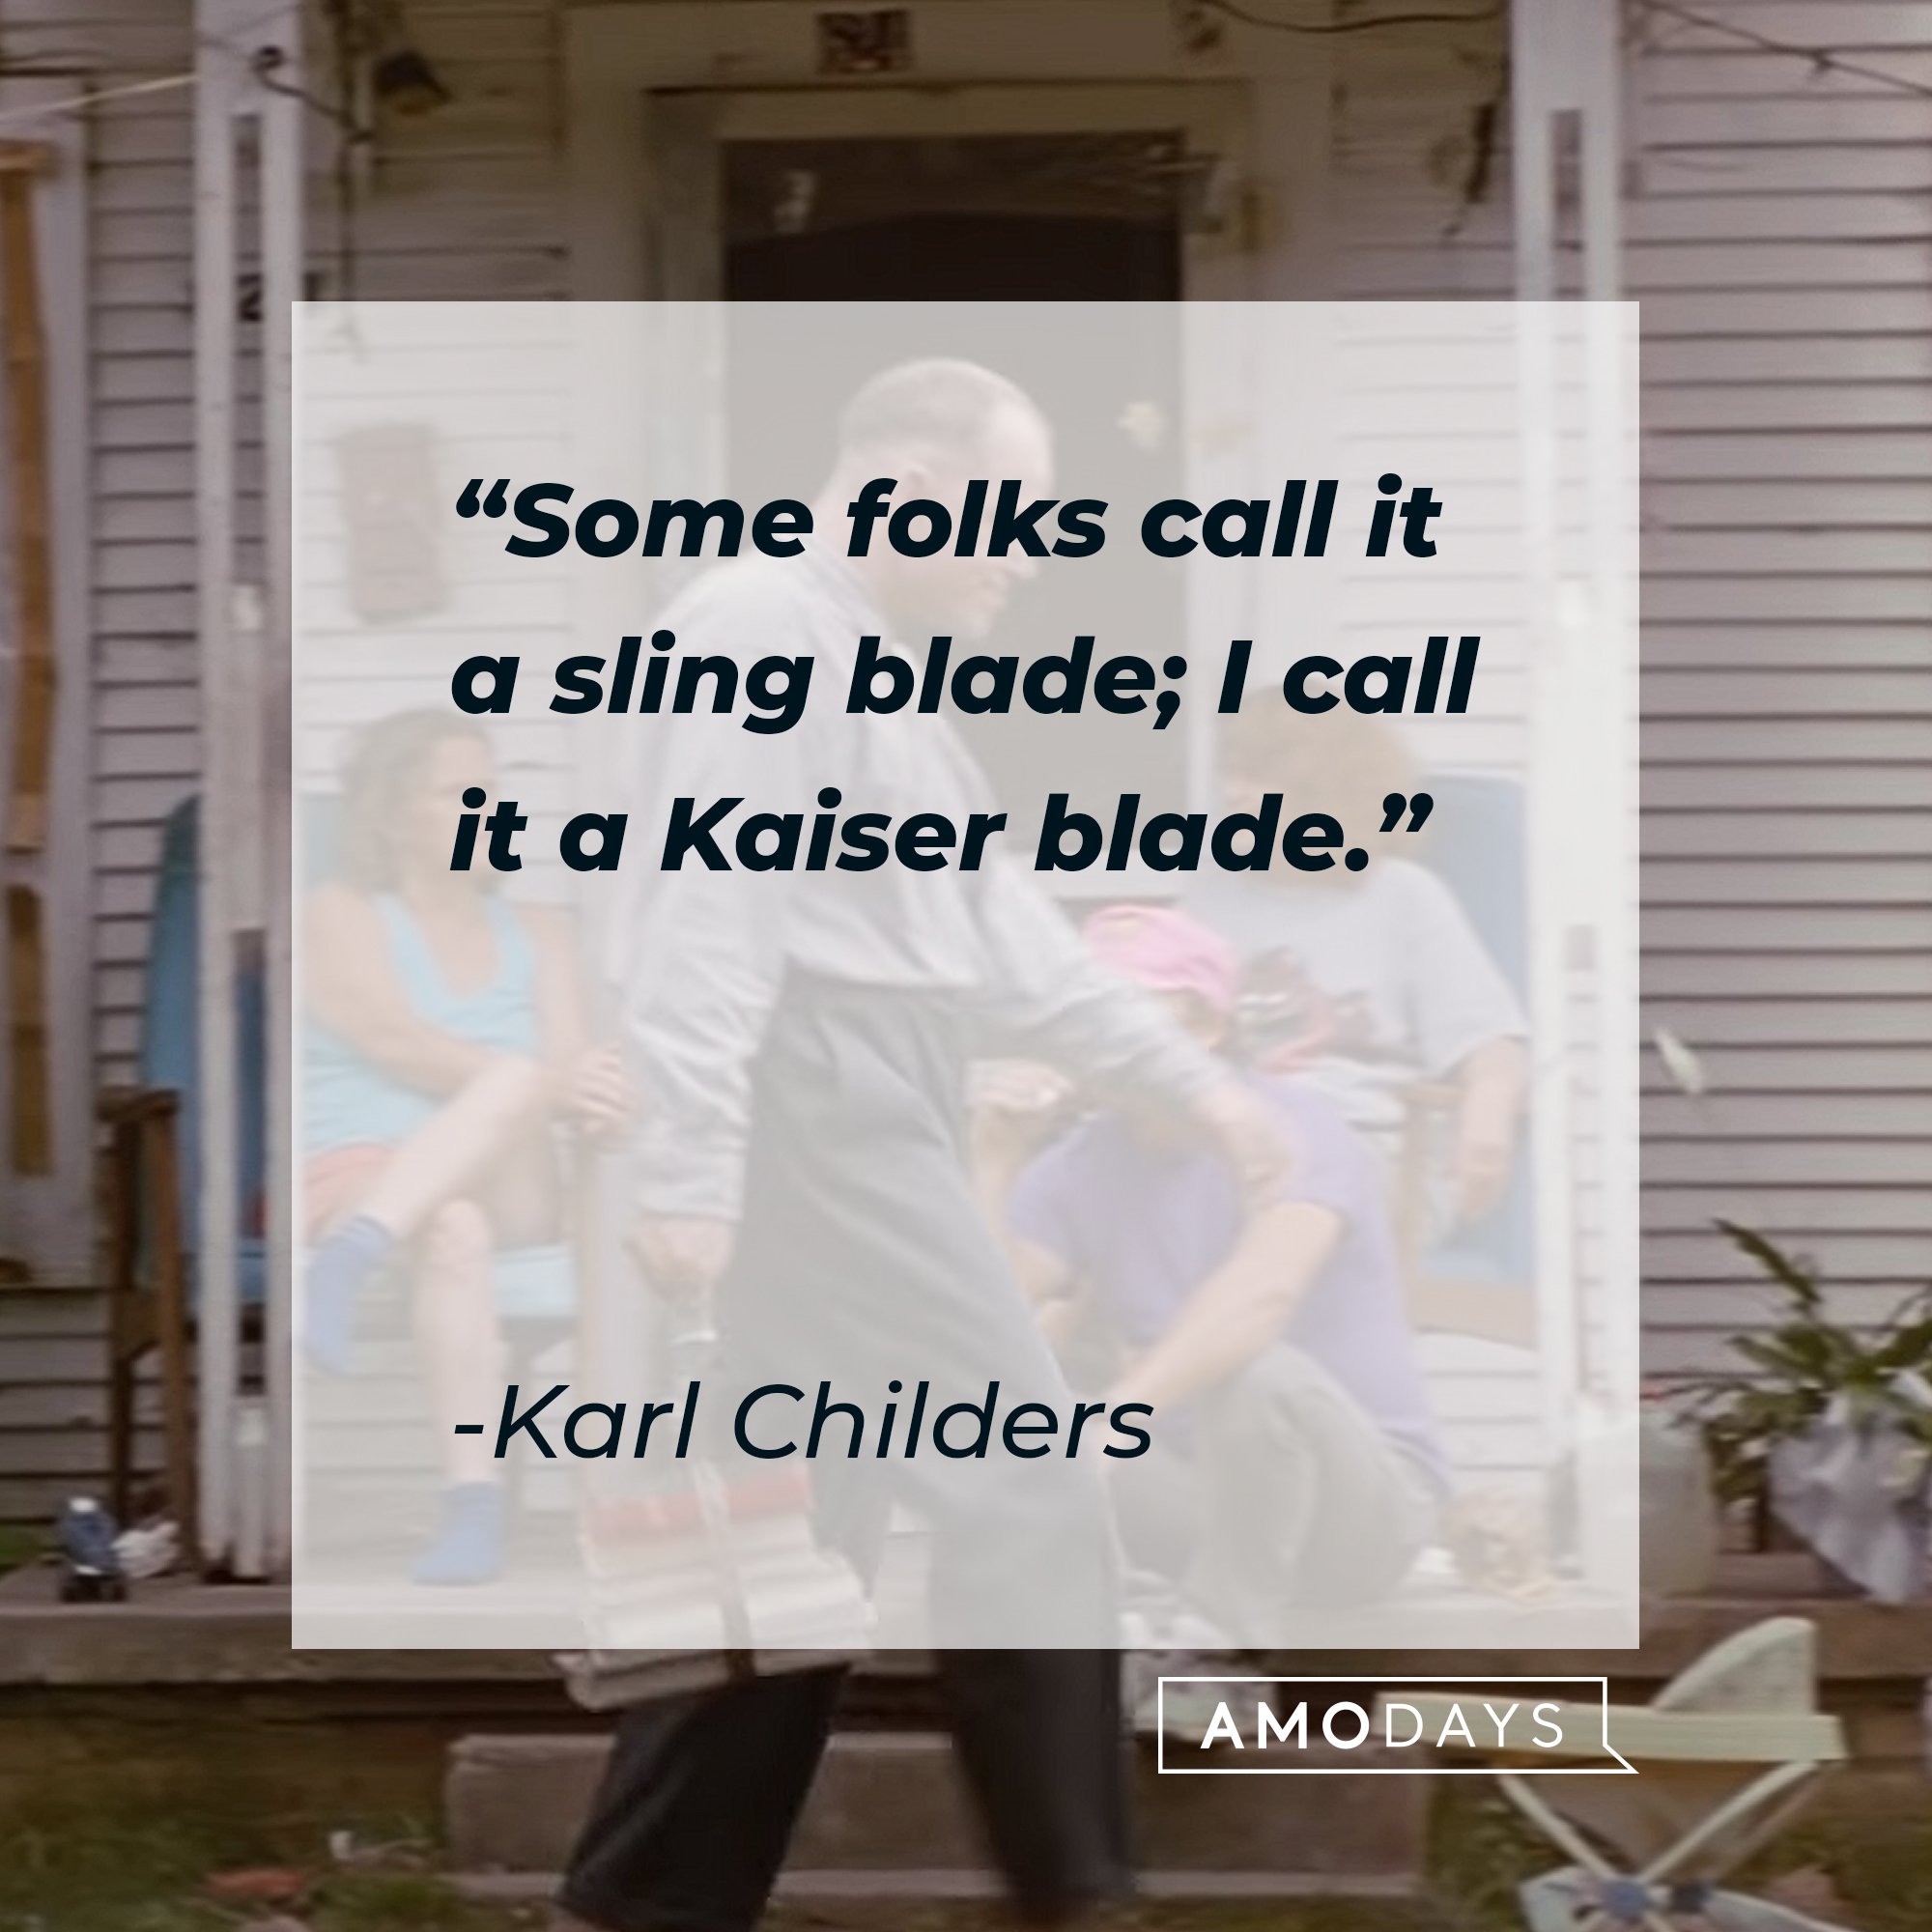 Karl Childers' quote: "Some folks call it a sling blade; I call it a Kaiser blade." | Image: AmoDays